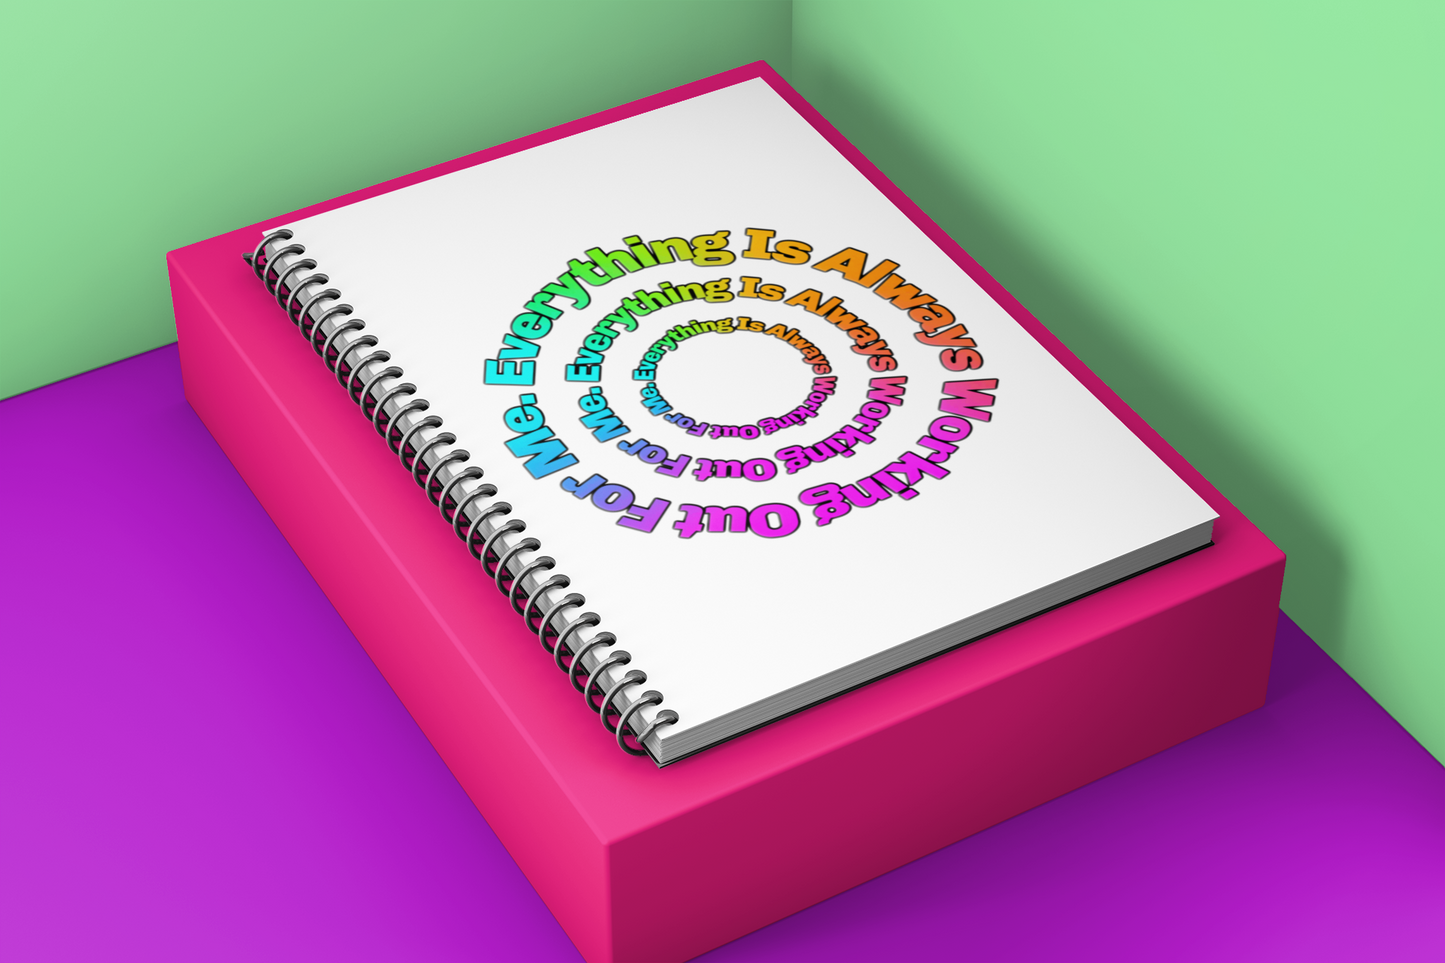 Everything Is Always Working Out For Me. Law Of Attraction Quote From Abraham Hicks. Spiral Notebook - Ruled Line